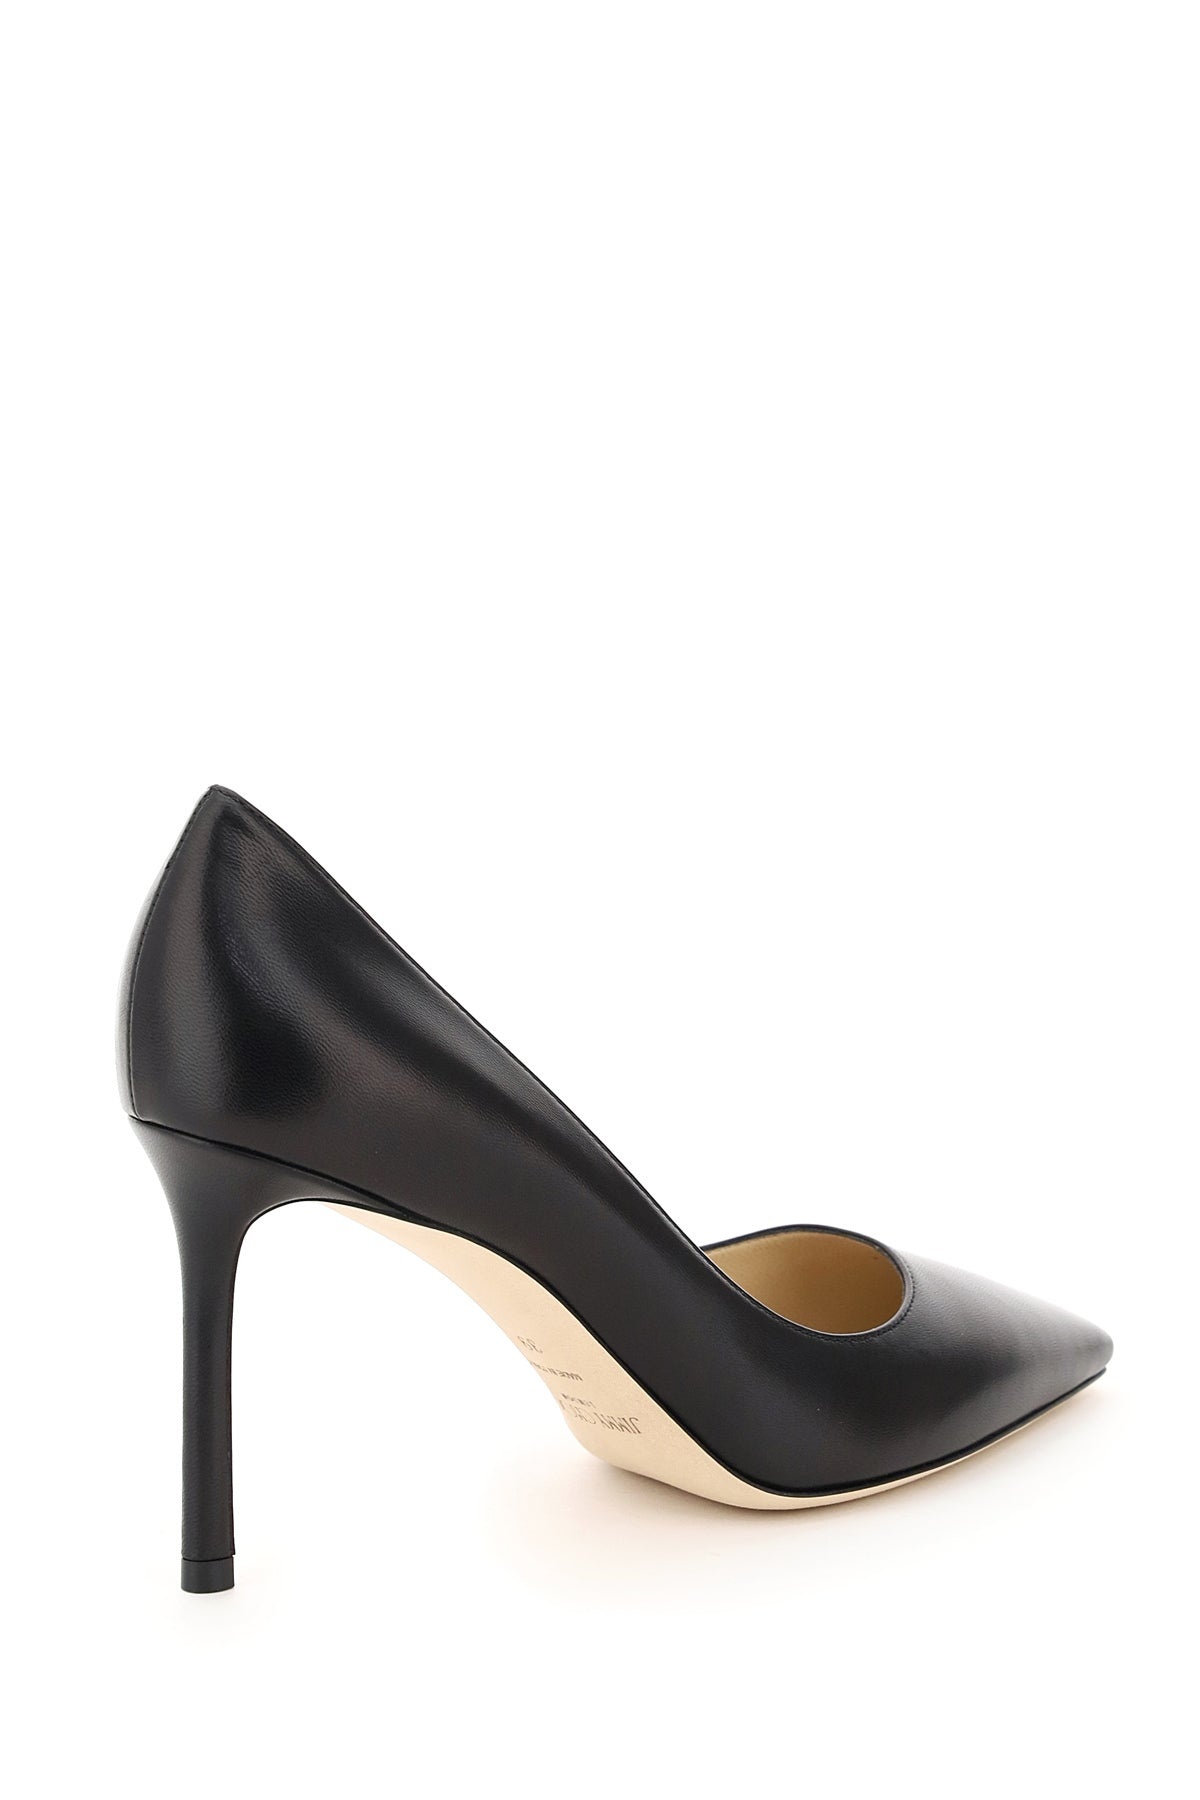 Nappa Leather Romy 85 Pumps - 4